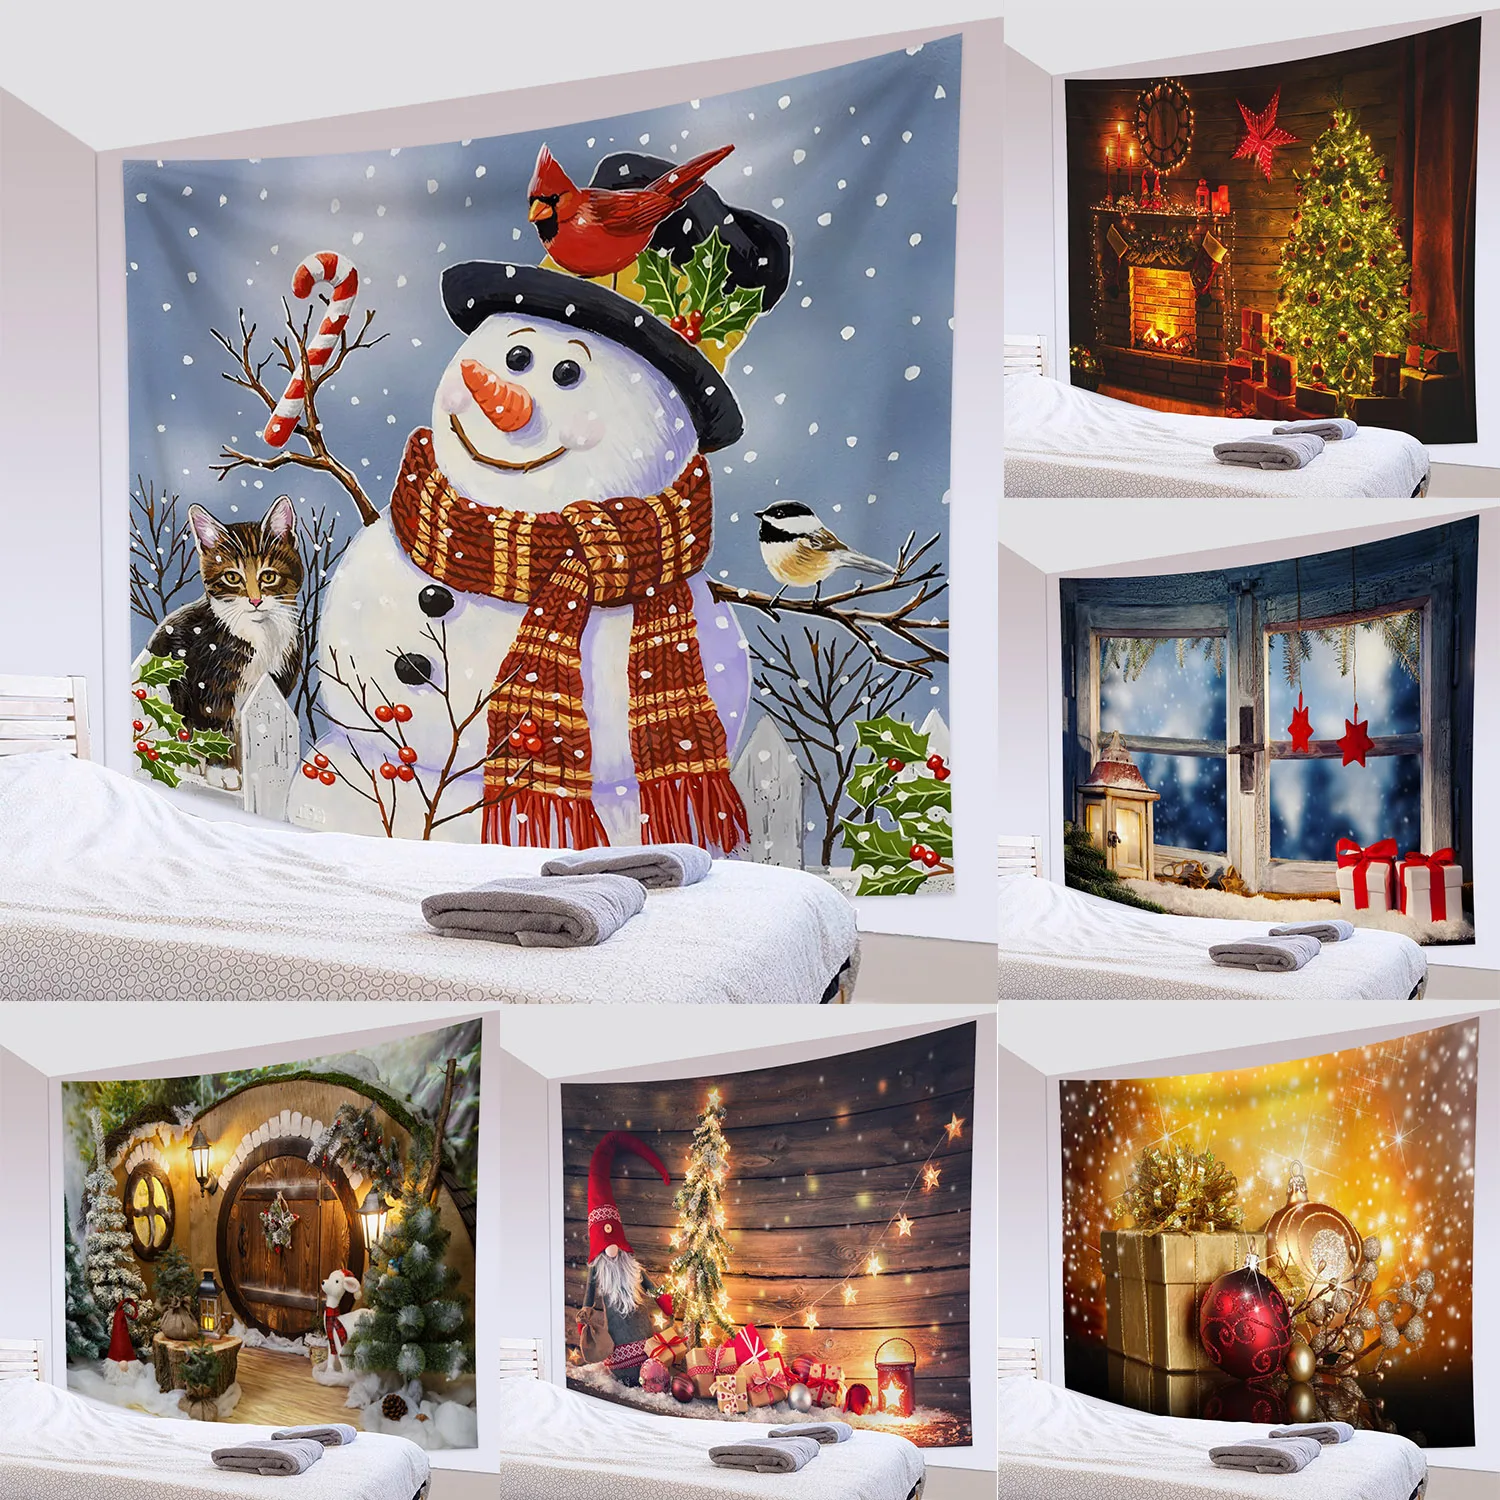 

Party Living Room Bedroom Dorm Wall Decor Backdrop Fabric Christmas Fireplace Christmas Tree Printing Home Decor Tapestry